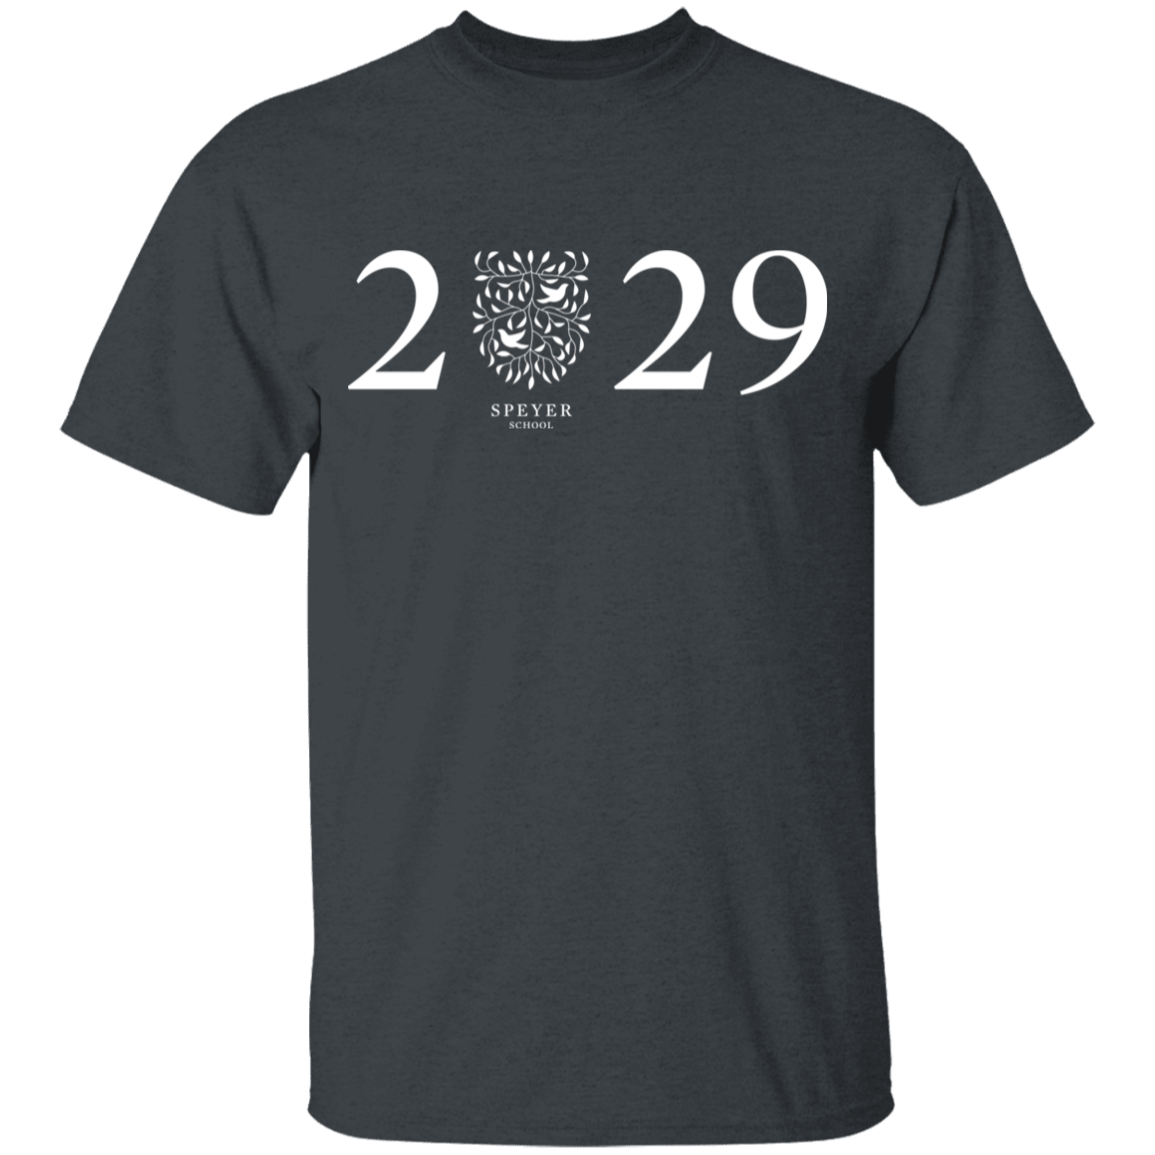 Class of 2029 T-Shirt, Youth Sizes